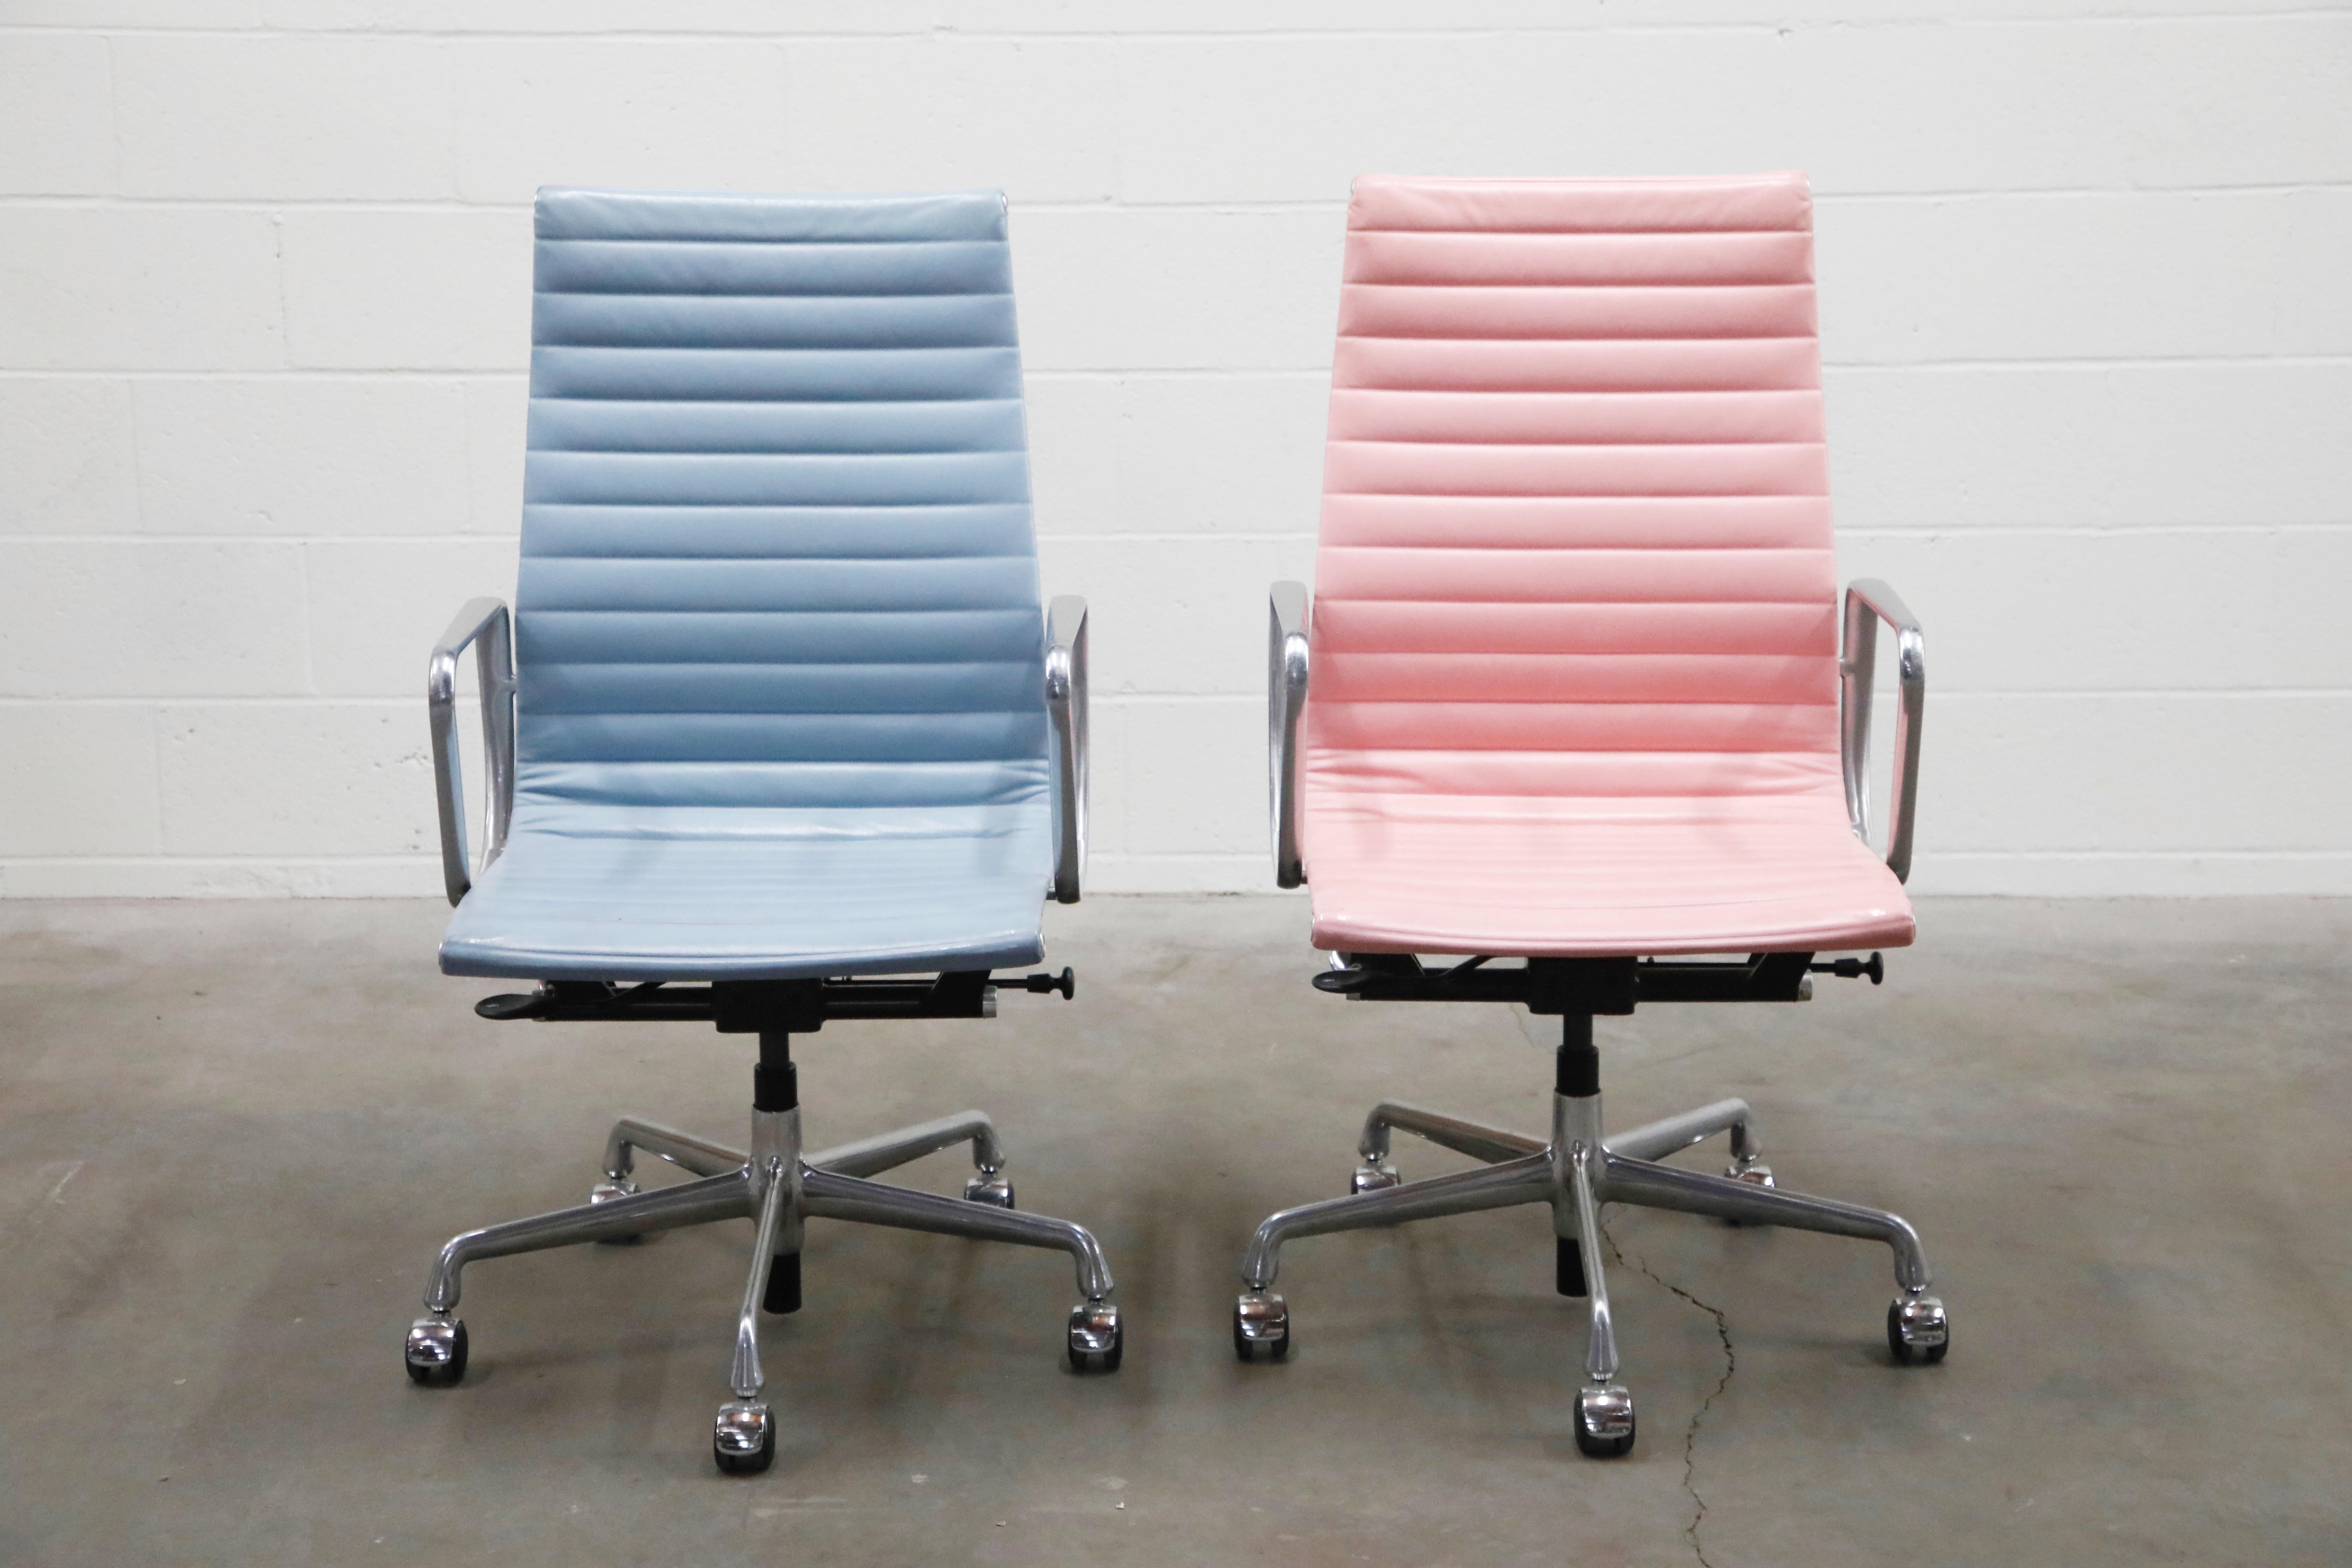 This lovely Herman Miller baby blue leather Eames Aluminum Group Executive Chair has the fully upgraded extended version of the Pneumatic Lift option. This increases the height in which the chairs can be adjusted to, from 16.5